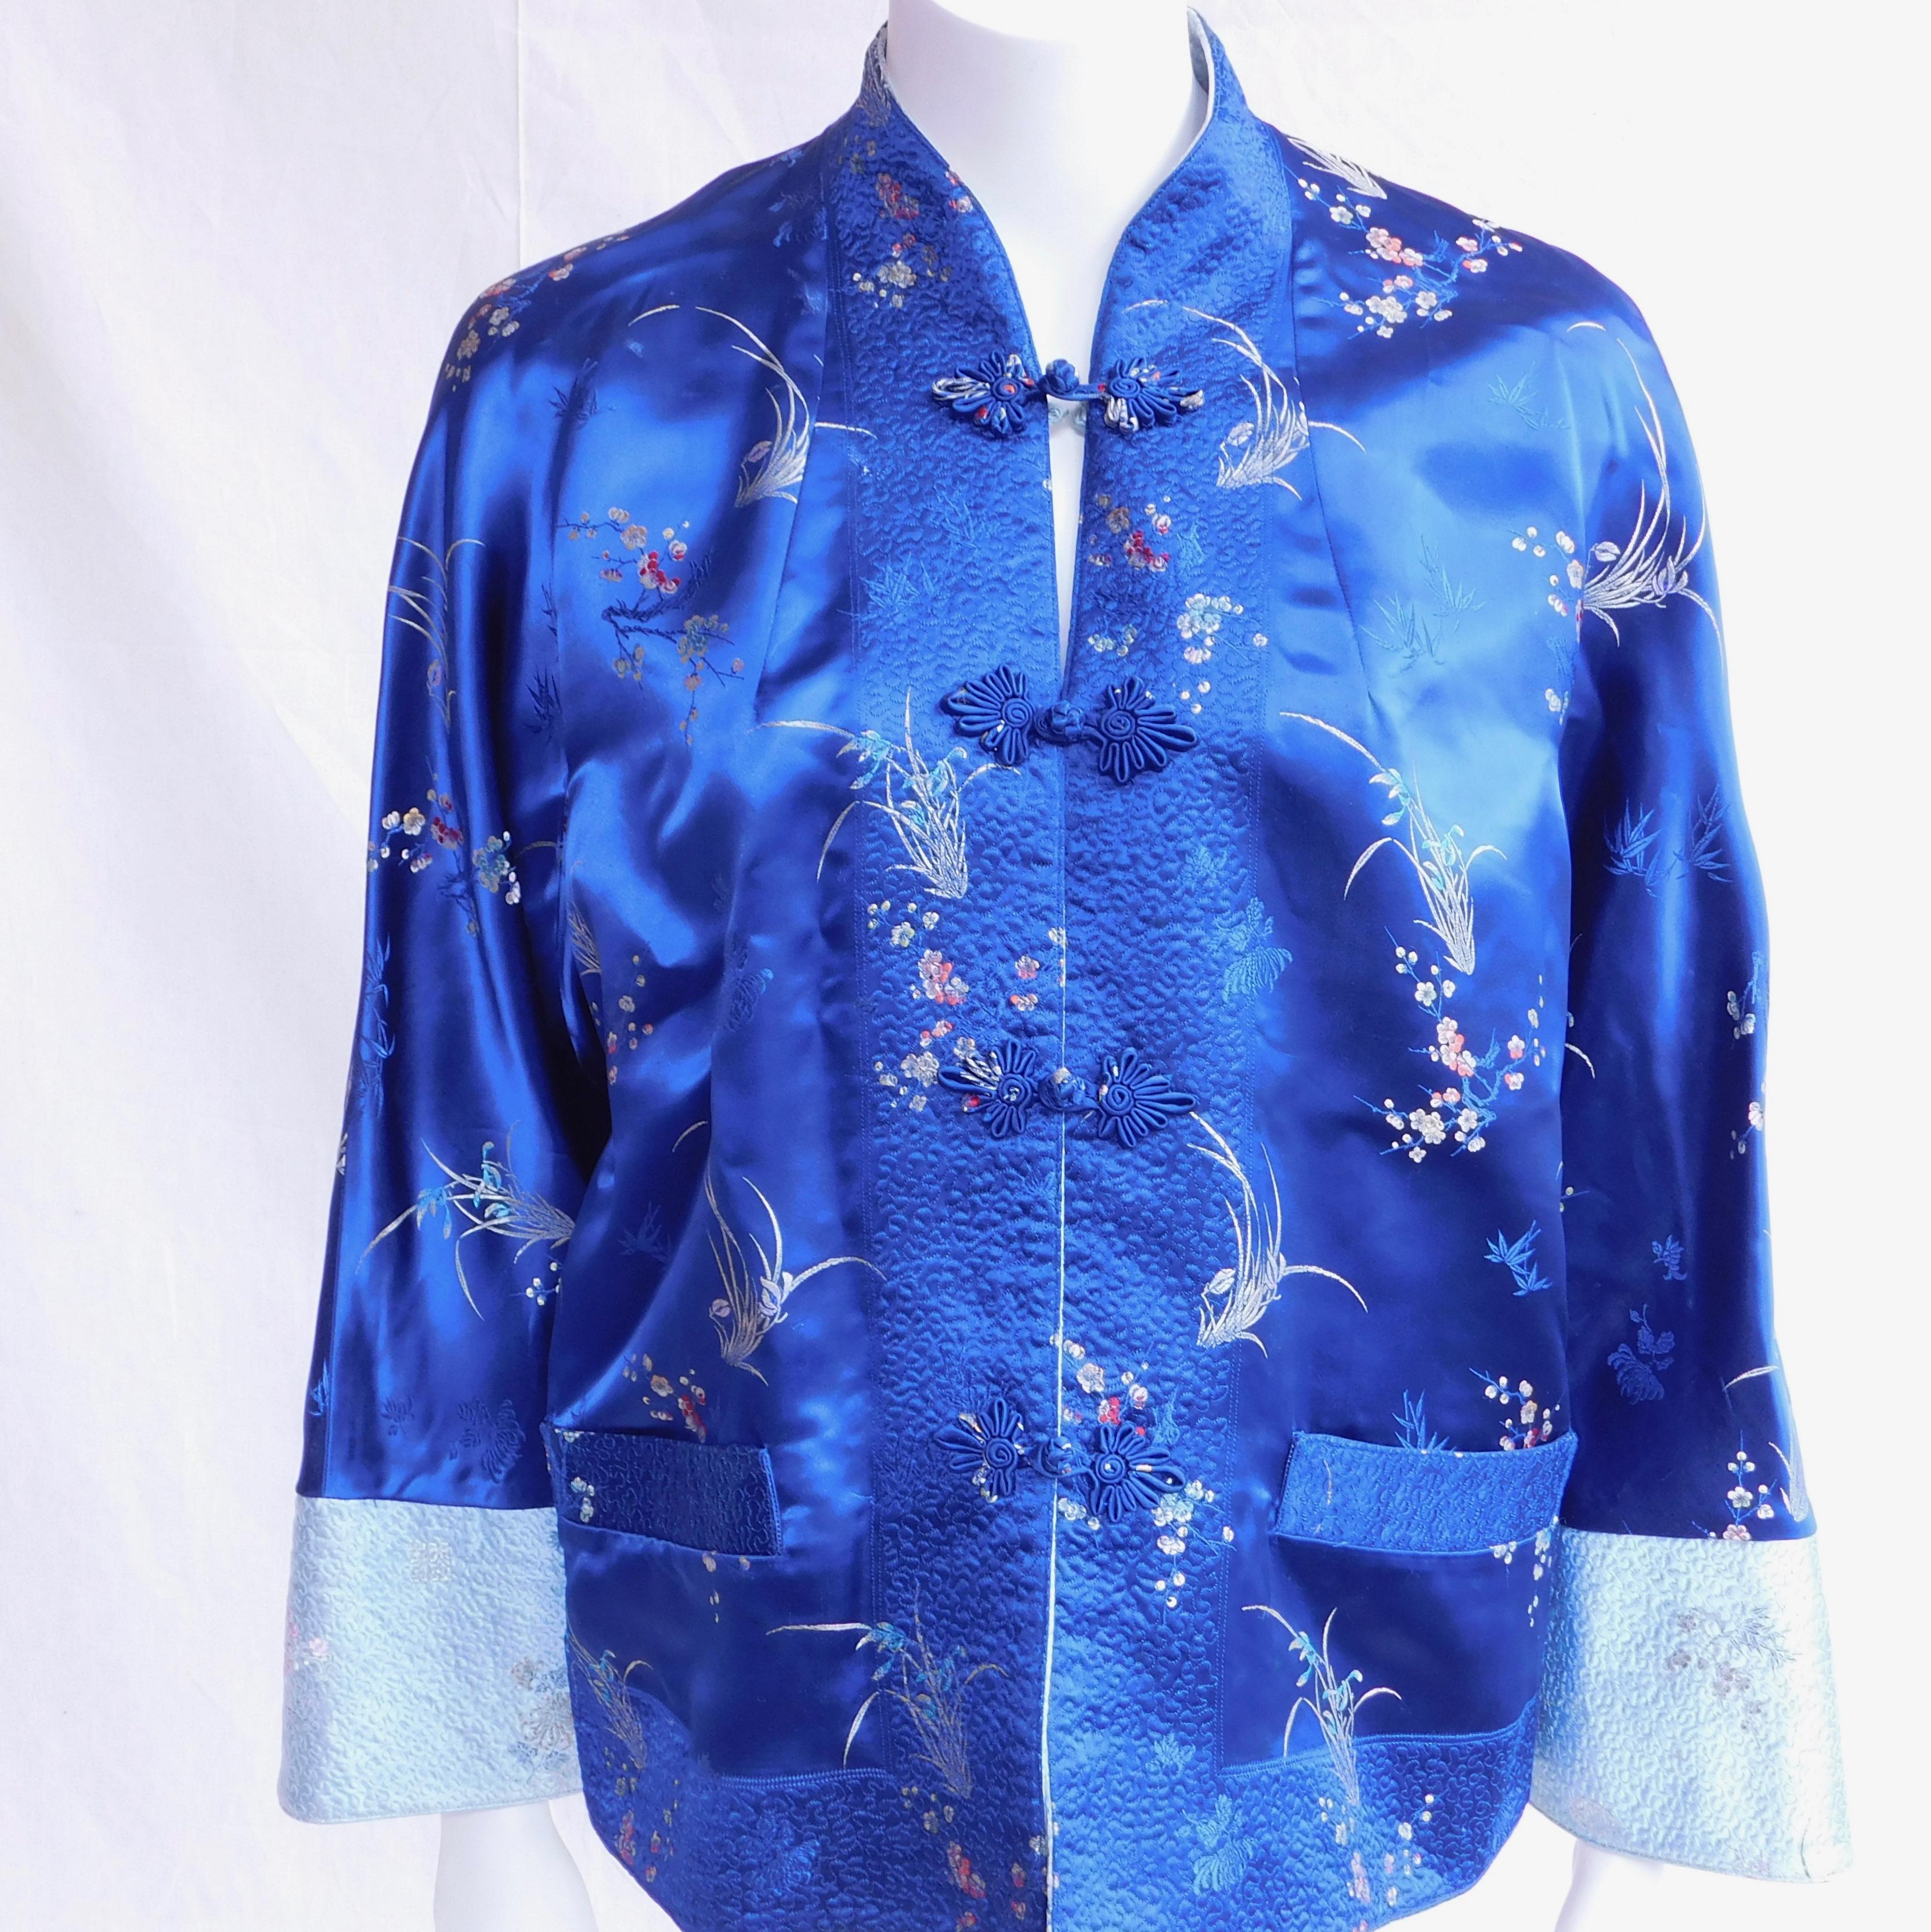 Circa 1970 Chinese Mandarin jacket made to be fully reversible in royal blue silk on one side and light blue silk on the other. Closures are hand tied frog knots. 
Made to be a loose unconstructed fit , waist is 117 cm total width(46